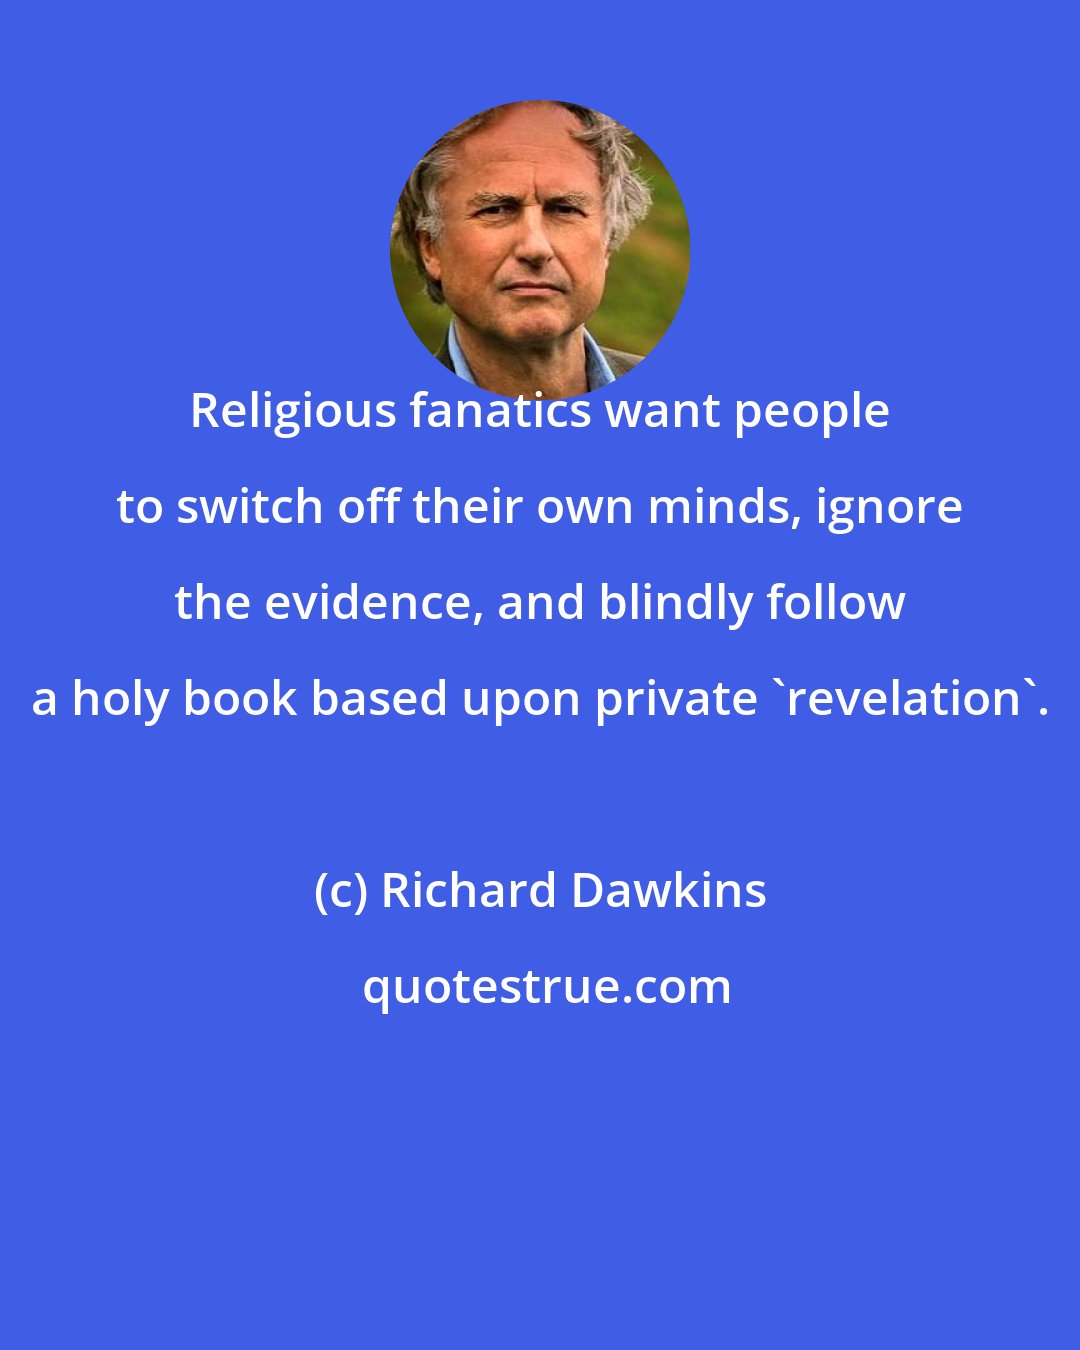 Richard Dawkins: Religious fanatics want people to switch off their own minds, ignore the evidence, and blindly follow a holy book based upon private 'revelation'.